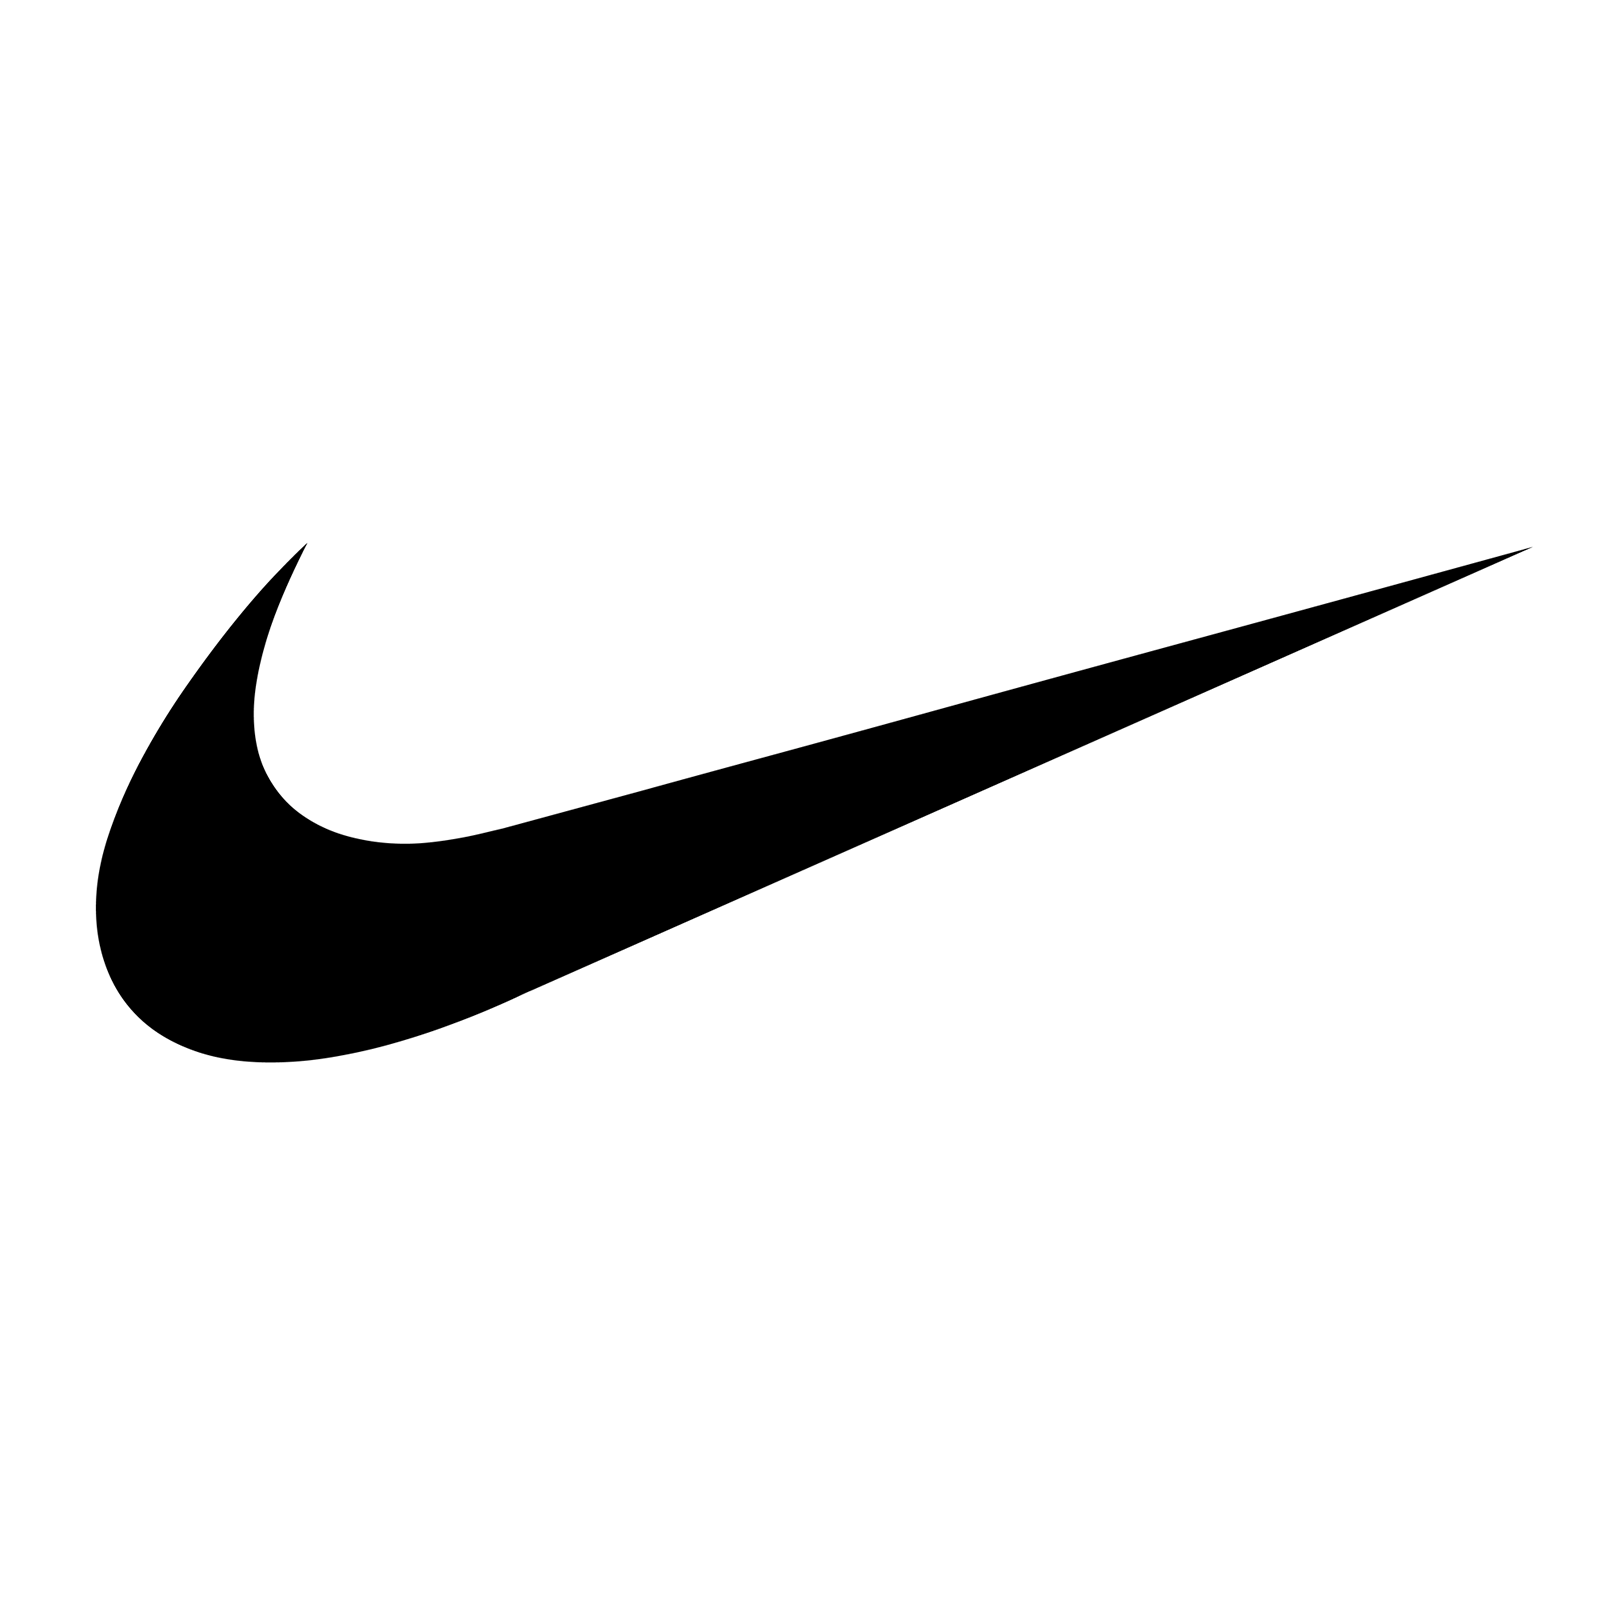 NIKE, Inc.— Inspiration and Innovation for Every Athlete in the World